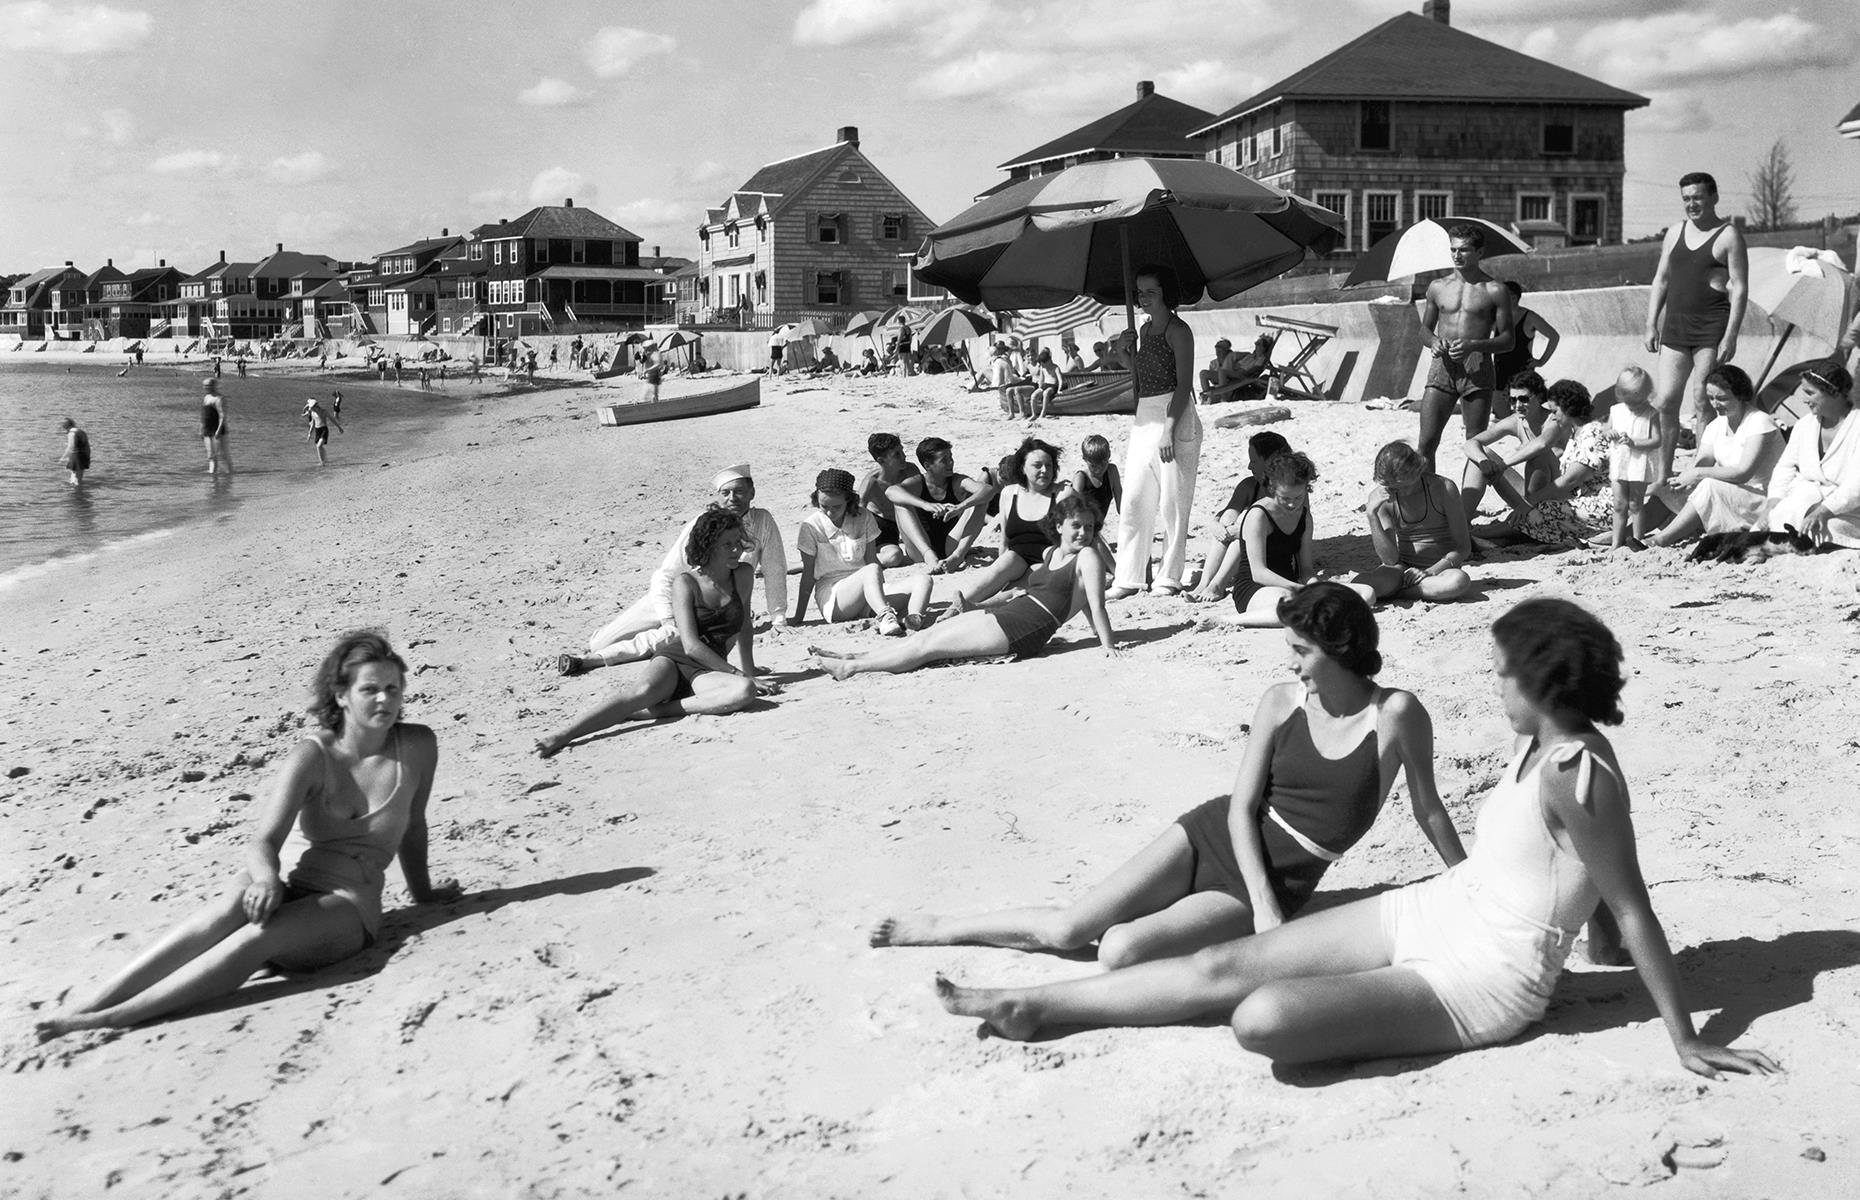 Arguably Massachusetts' most famous destination, Cape Cod has been drawing in vacationers for more than a century. This photograph, taken at the tail end of the Roaring Twenties, pictures glamorous young sunbathers basking on a beach at Buzzards Bay. The neat waterside houses and patterned umbrellas no doubt brighten the scene.